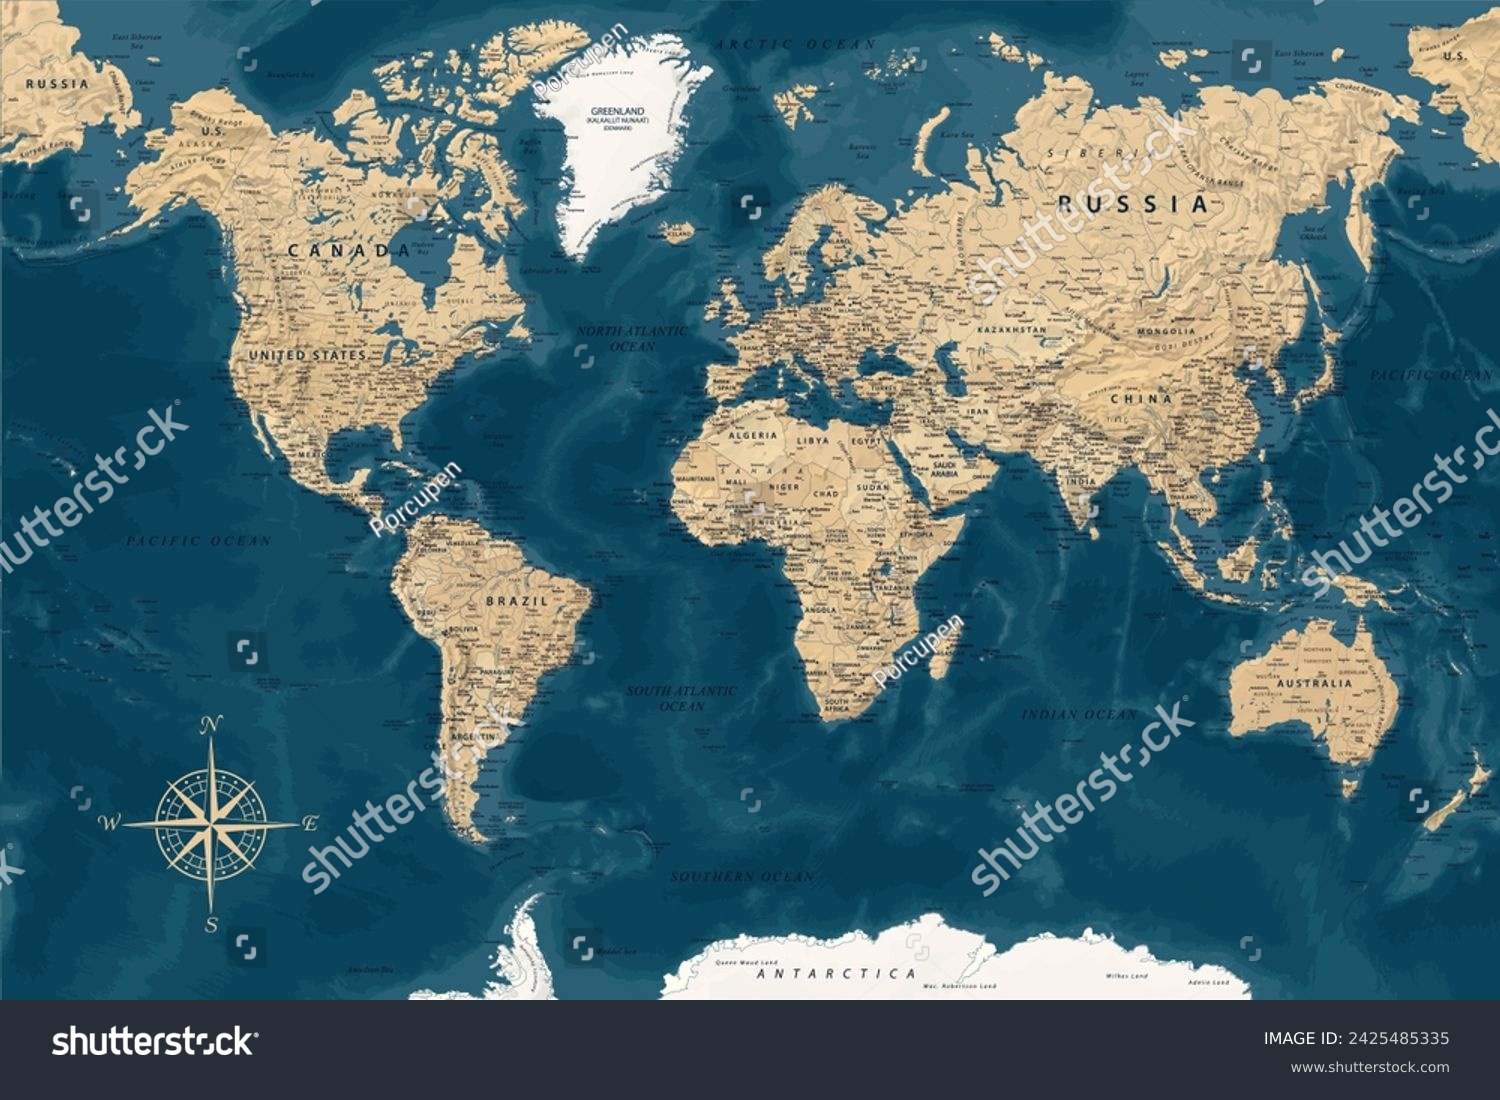 World Map - Highly Detailed Vector Map of the World. Ideally for the Print Posters. Dark Blue Golden Beige Retro Style. With Relief and Depth #2425485335